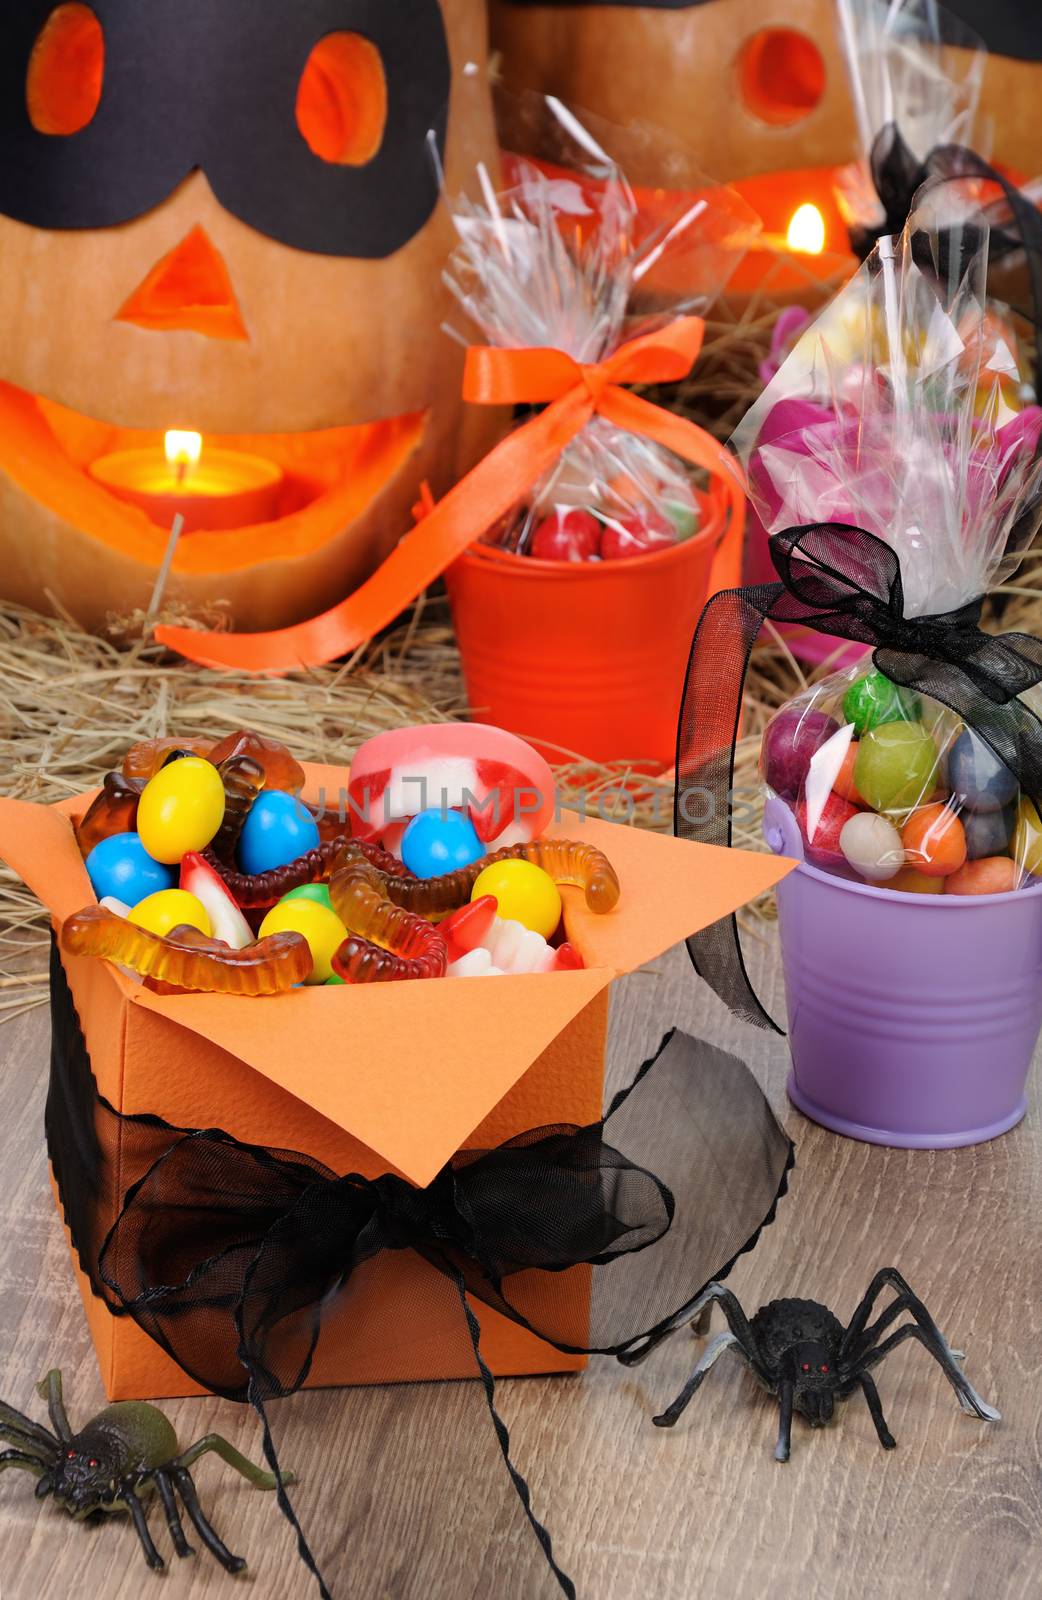 box filled with a variety of sweets on the table for Halloween